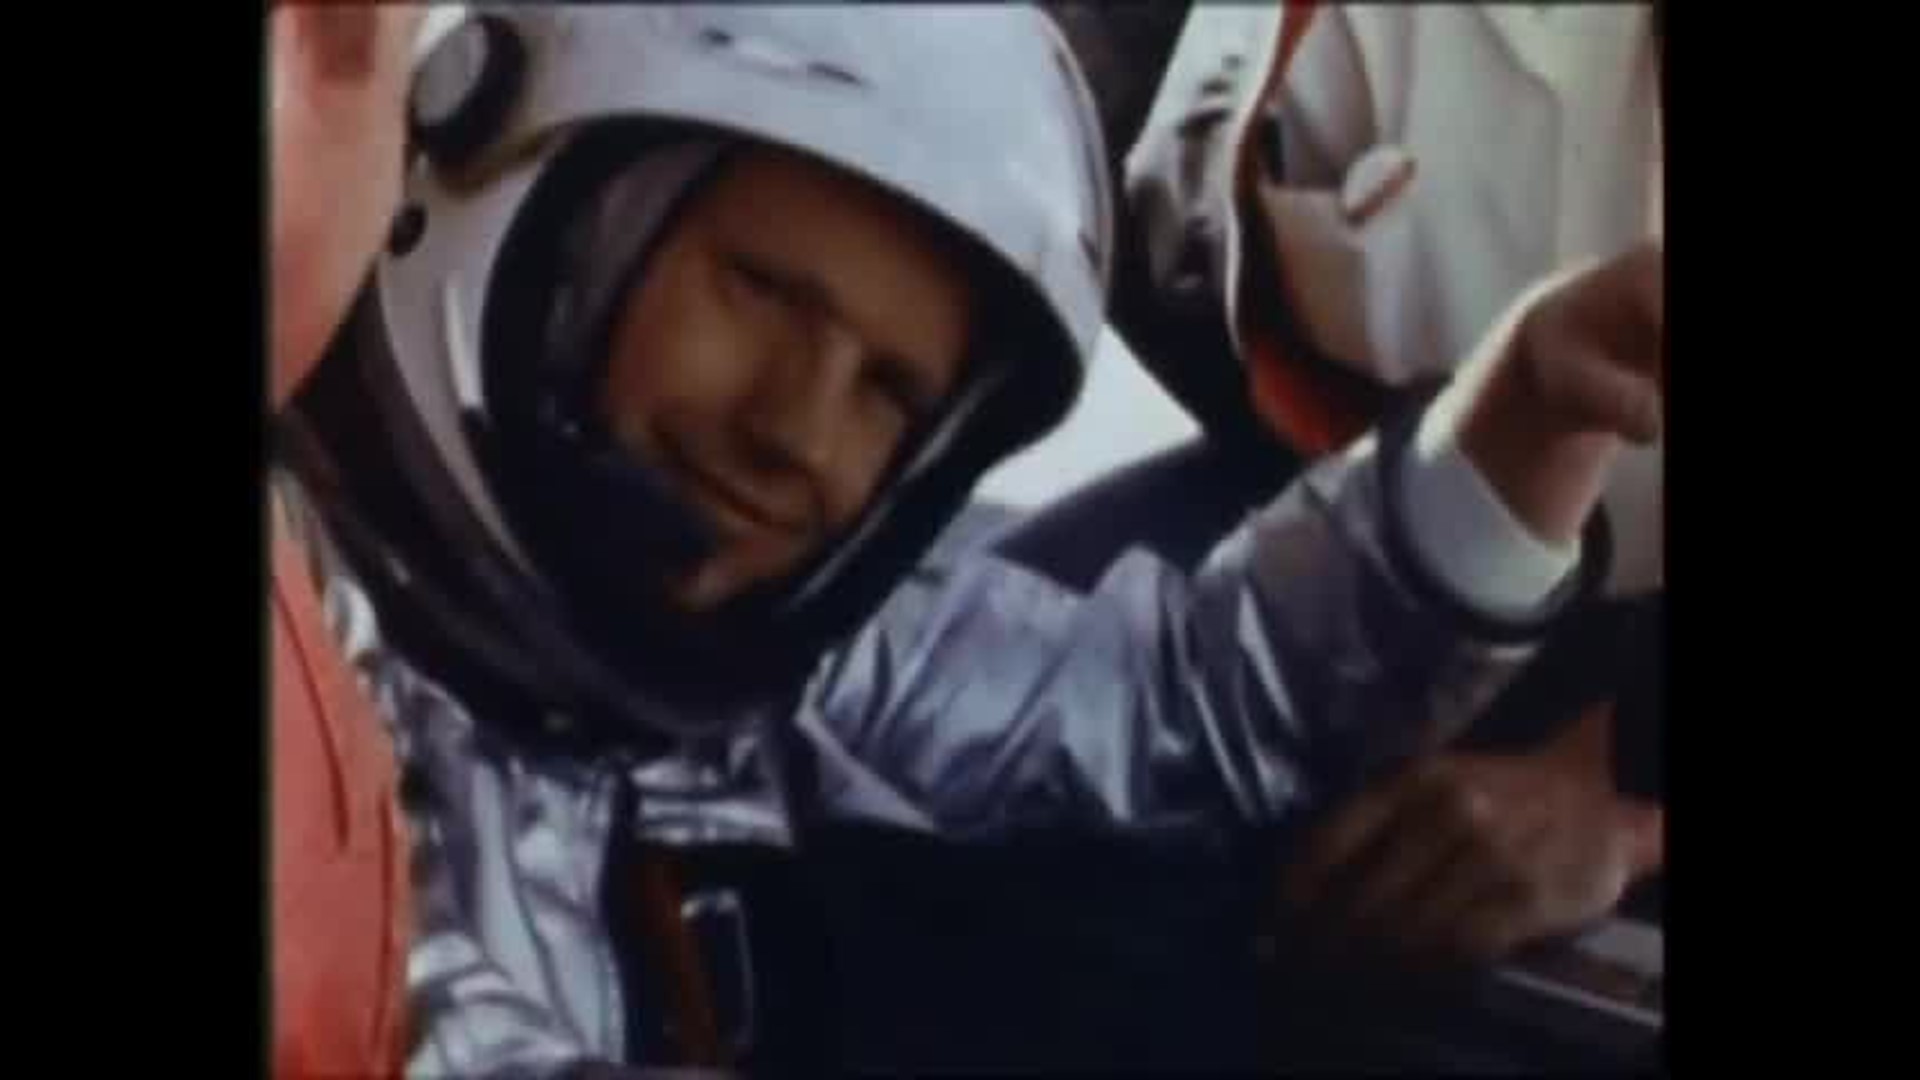 Famed Apollo 11 astronaut Neil Armstrong, the first man on the moon, was an engineering research test pilot at the NACA High-Speed Flight Station, later the NASA Flight Research Center, at Edwards from 1955 through 1962. This video recalls some of the many contributions he made to aerospace research during his seven-year stint at the center before he was selected for NASA's astronaut corps.